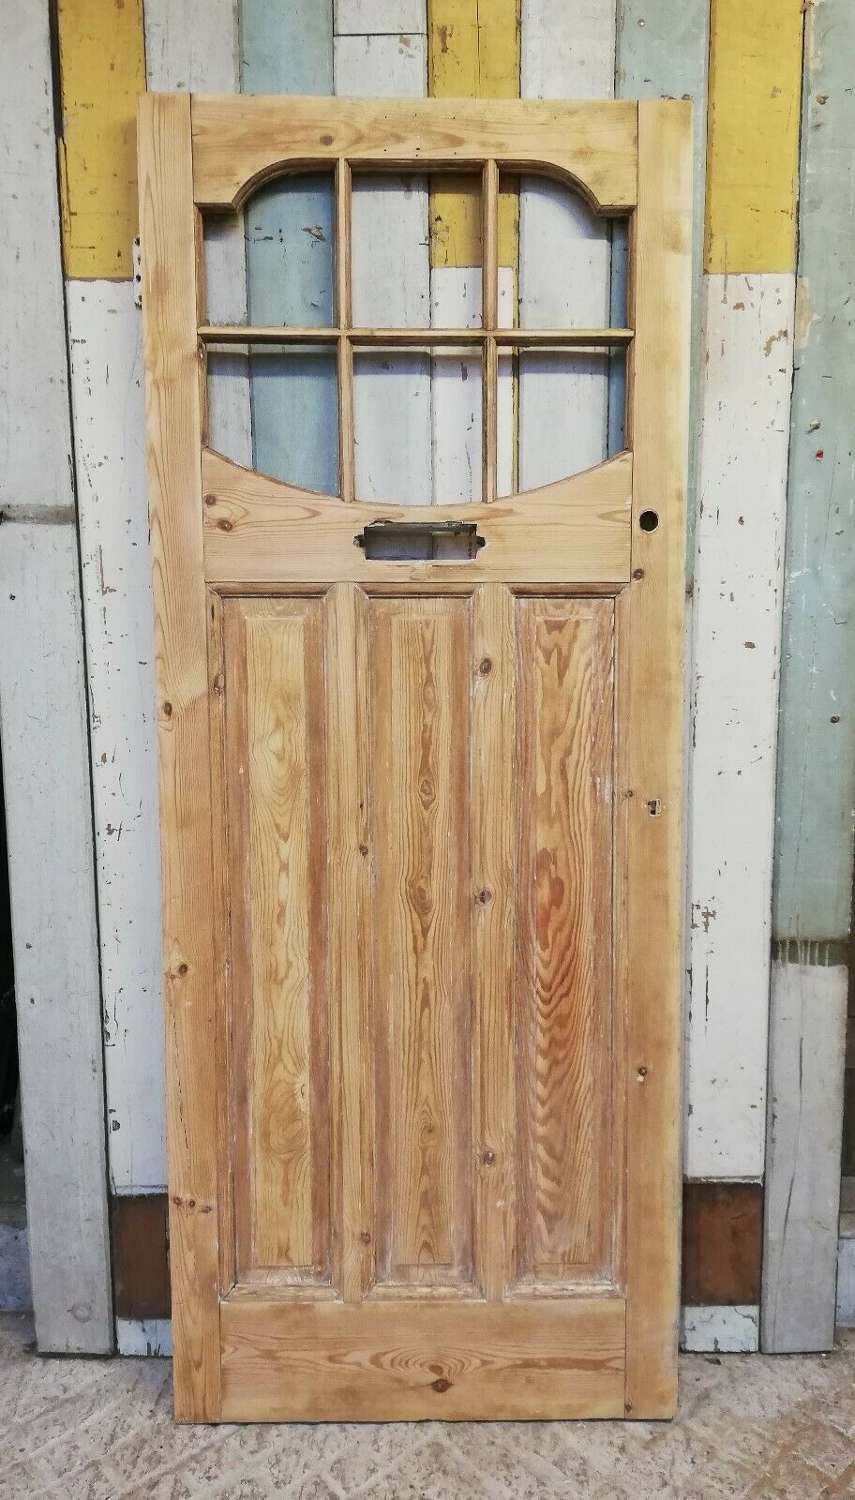 DE0525 A STRIPPED PINE EDWARDIAN FRONT DOOR WITH PANELS FOR GLAZING